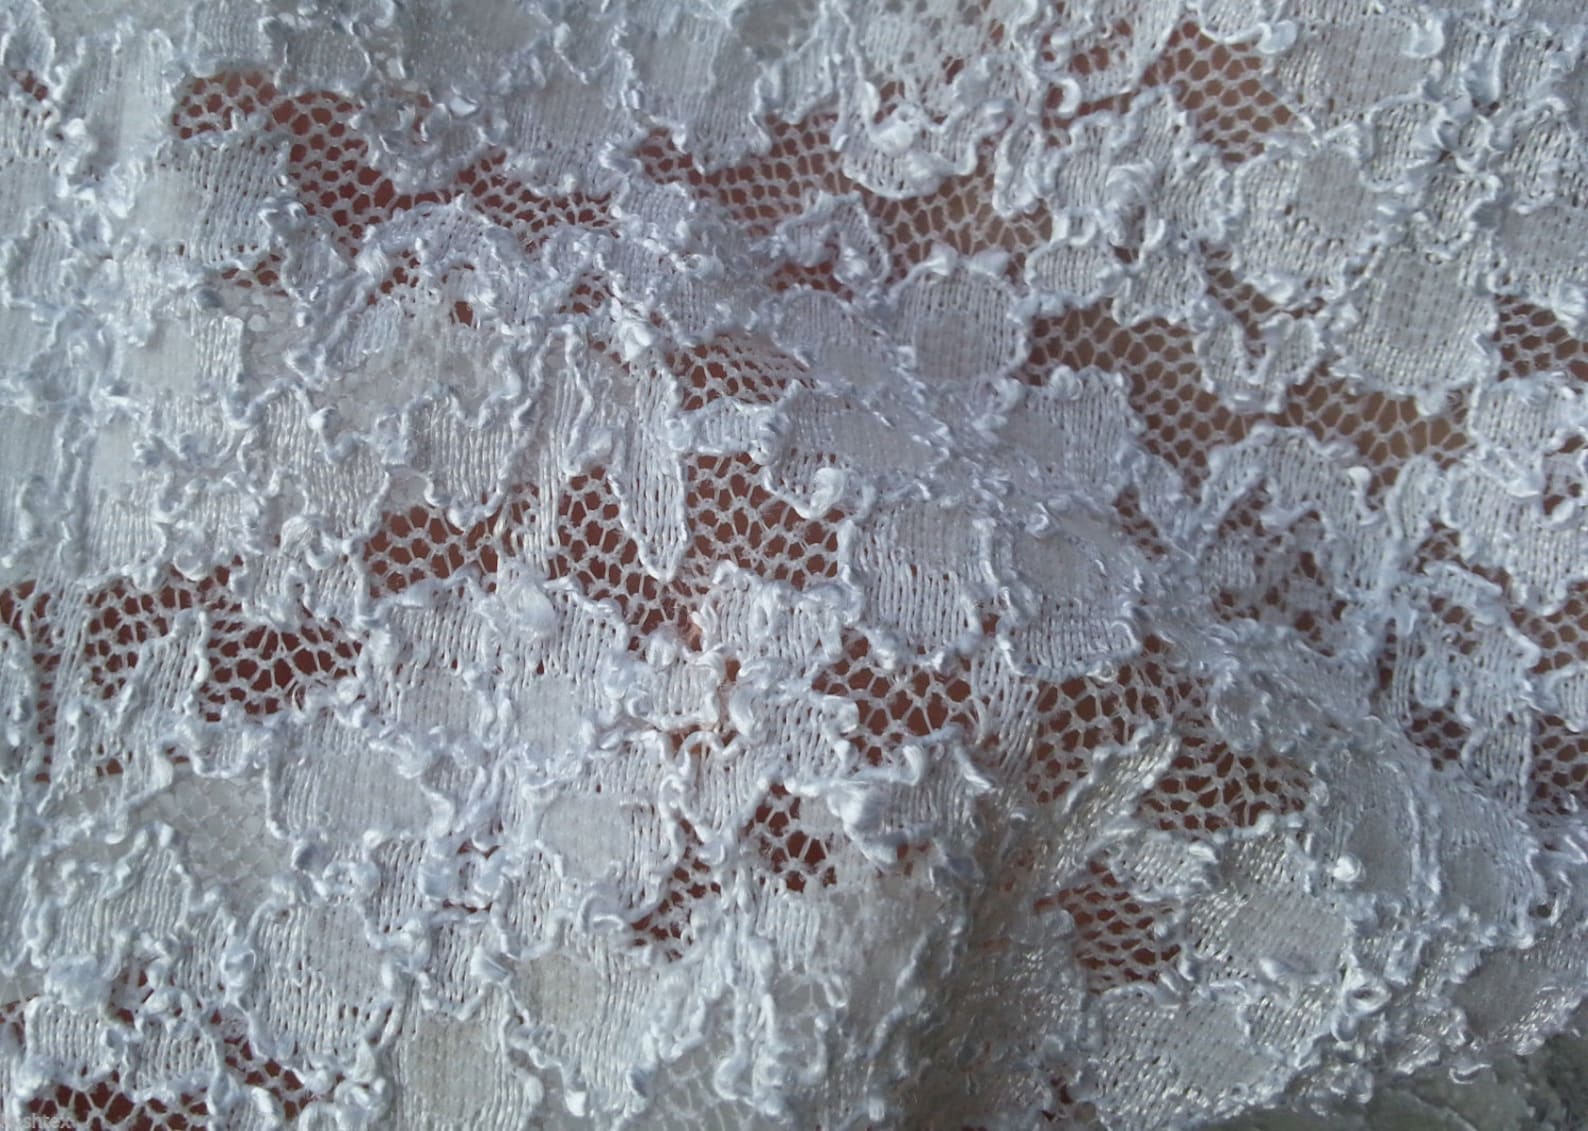 White French Lace Bridal and Lingerie Fabric by the Yard | Etsy